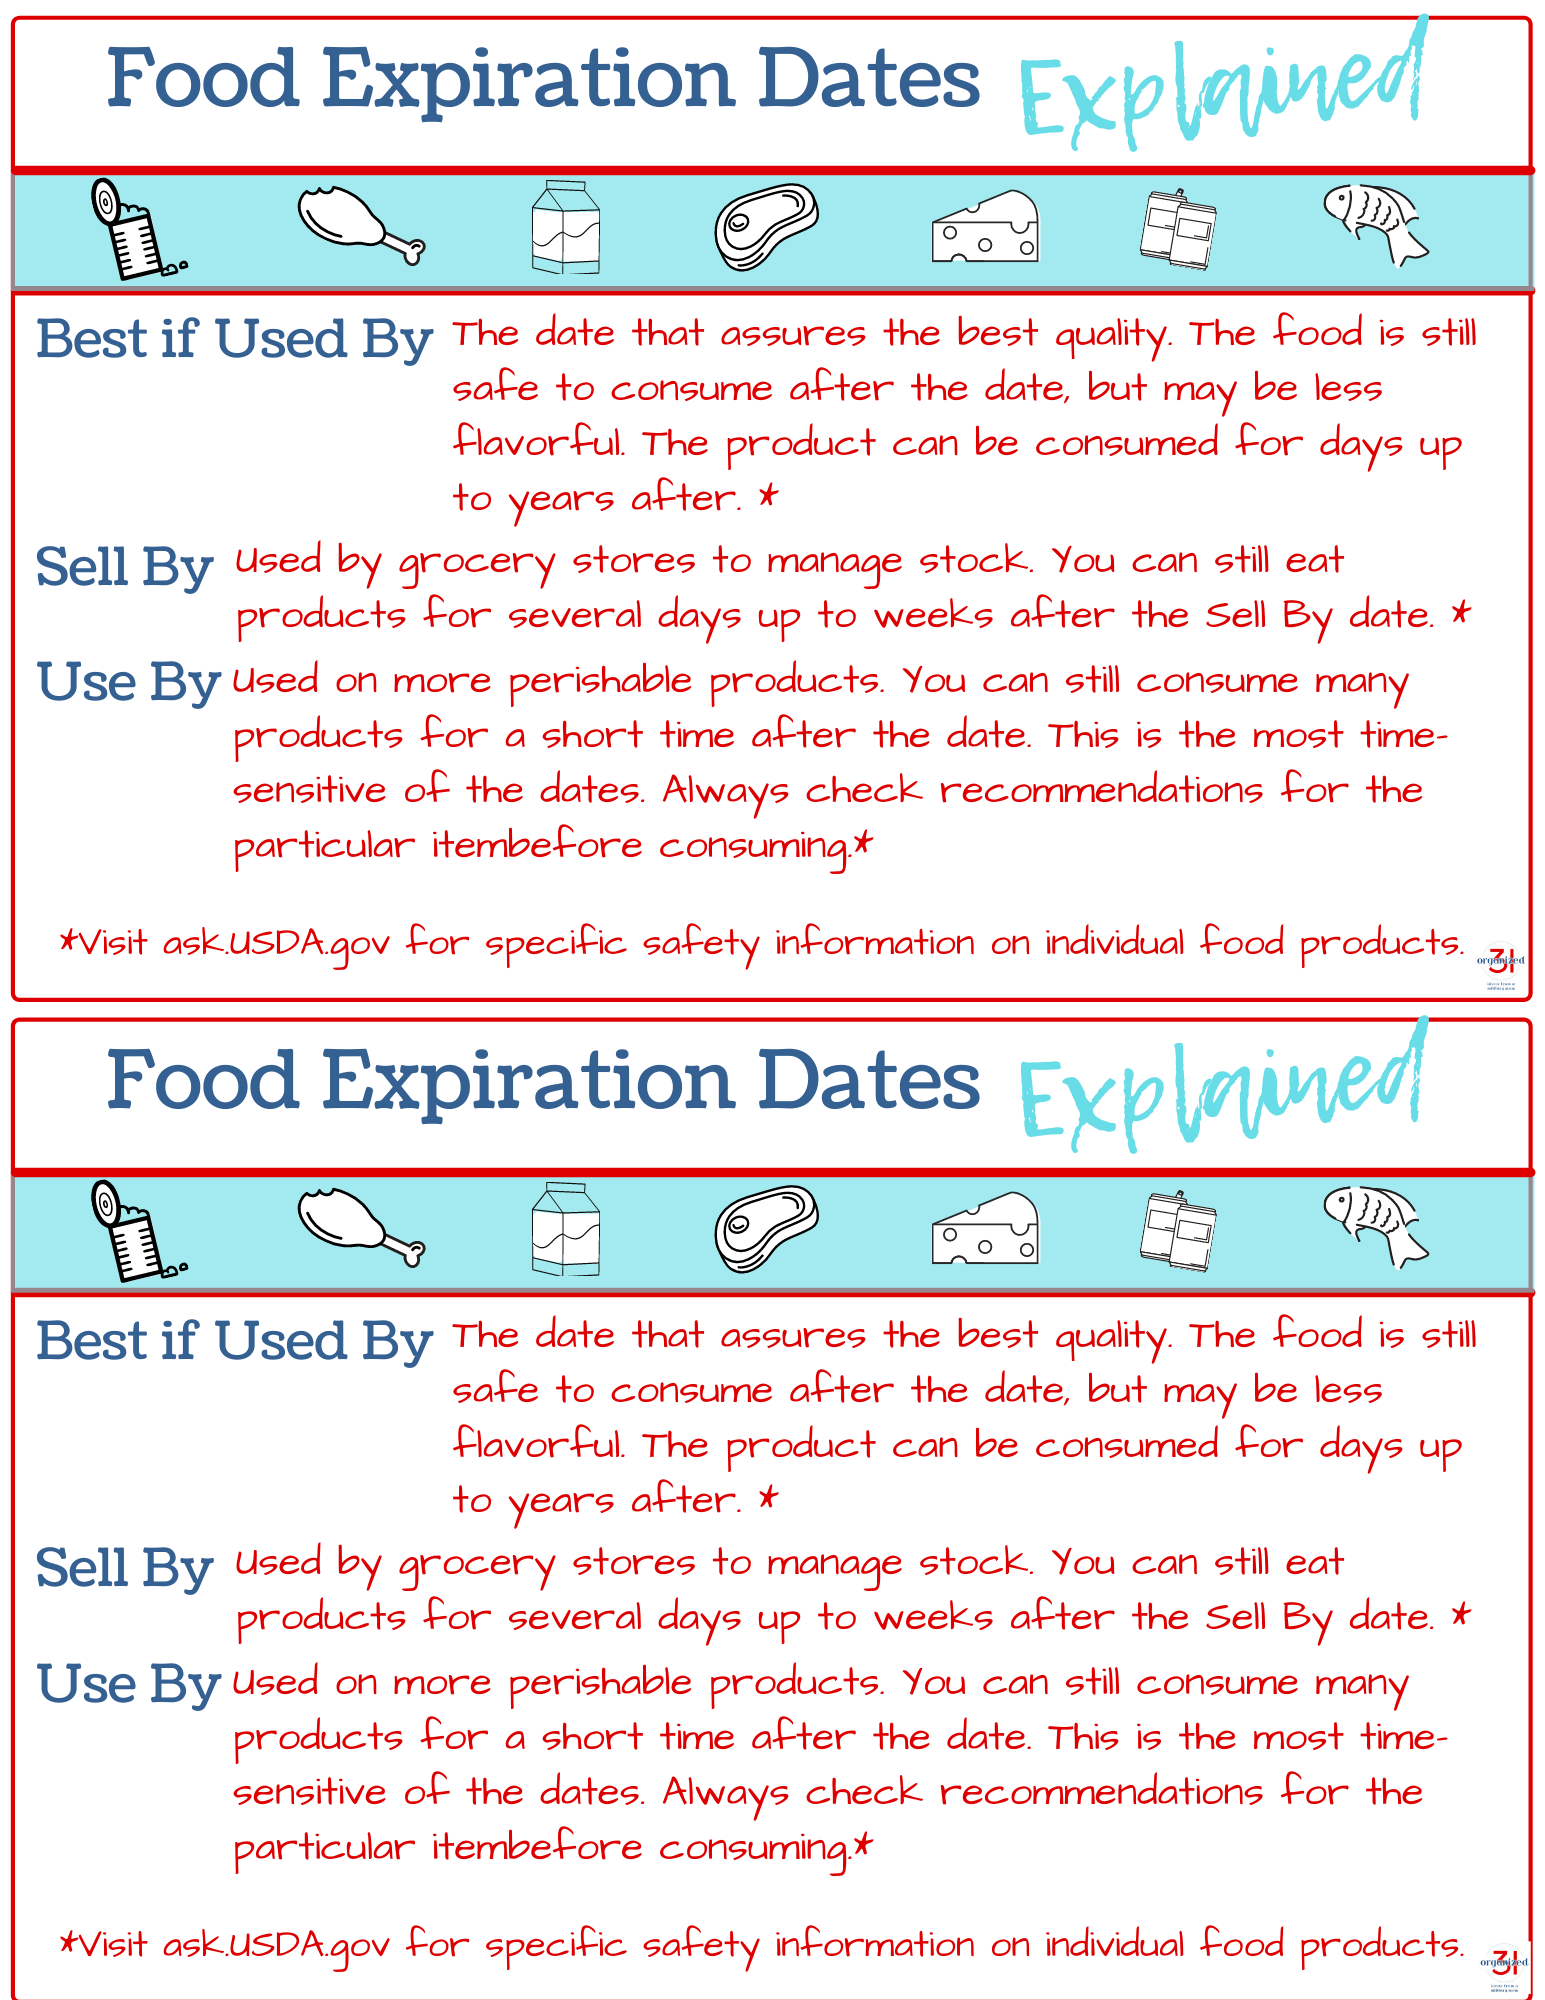 Managing Food Expiration Dates with Reminder Cards using the product "Food Expiration Dates Explained" from the brand "Organized 31 Shop.